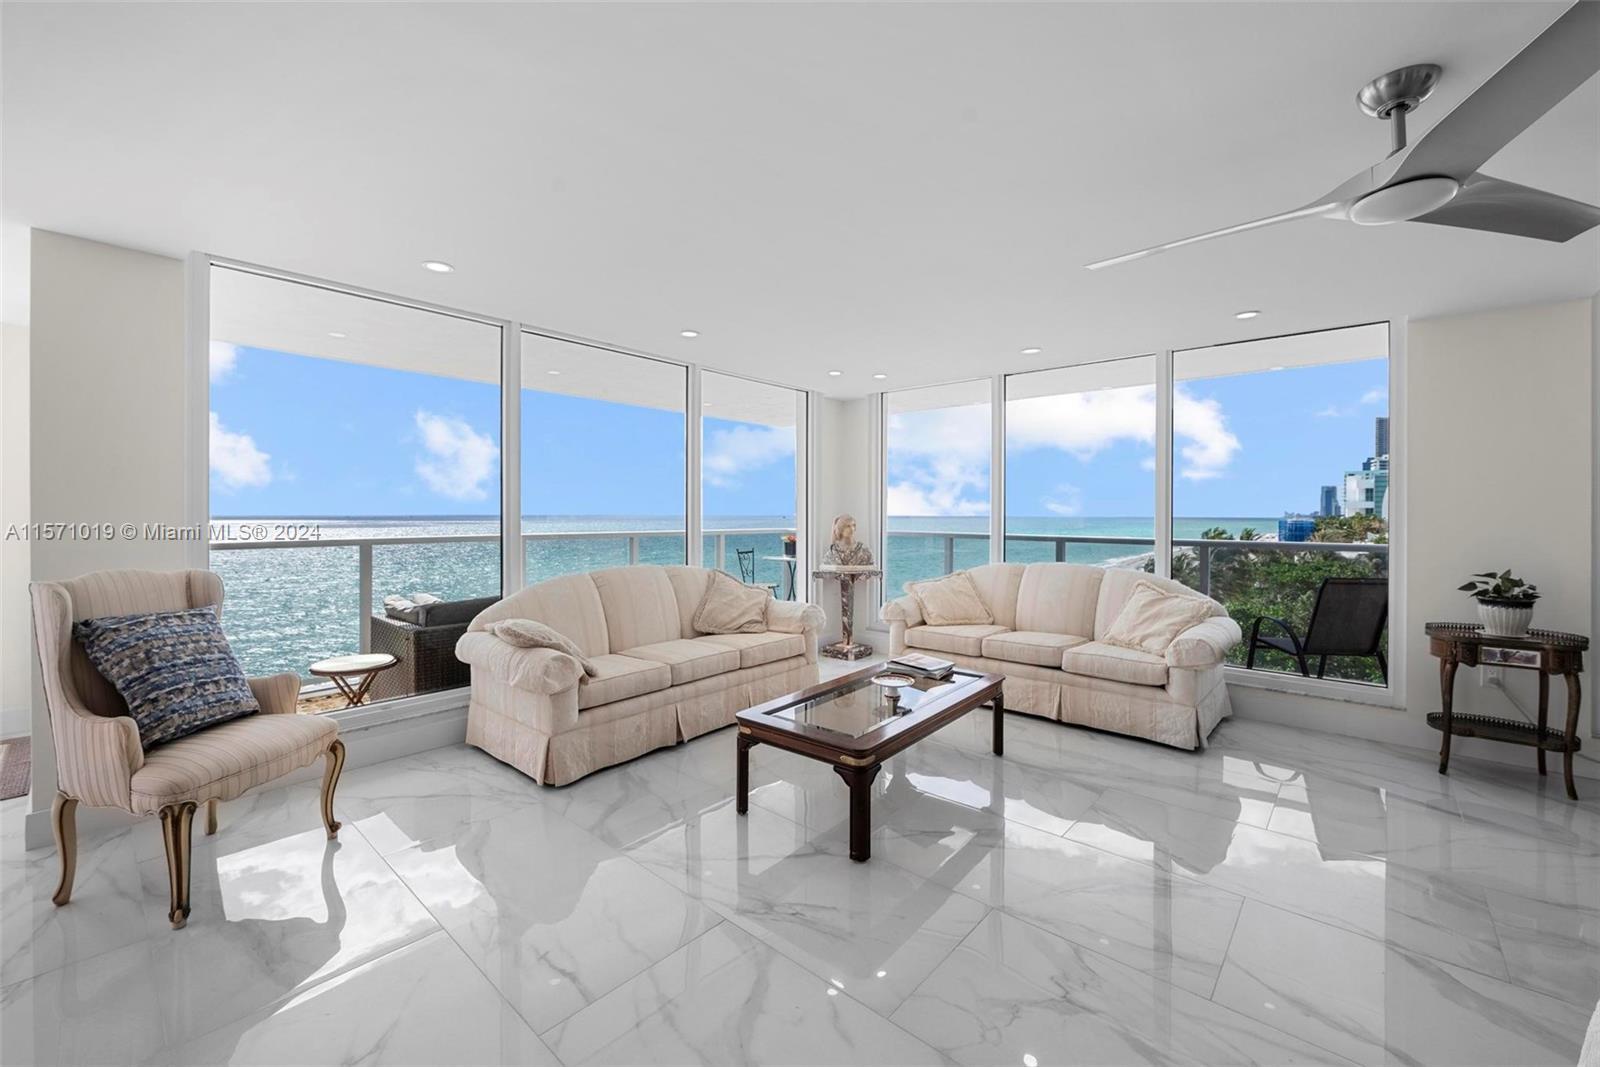 Experience luxury coastal living in this stunning 2-bedroom, 2.5-bathroom oceanfront unit. Offering 